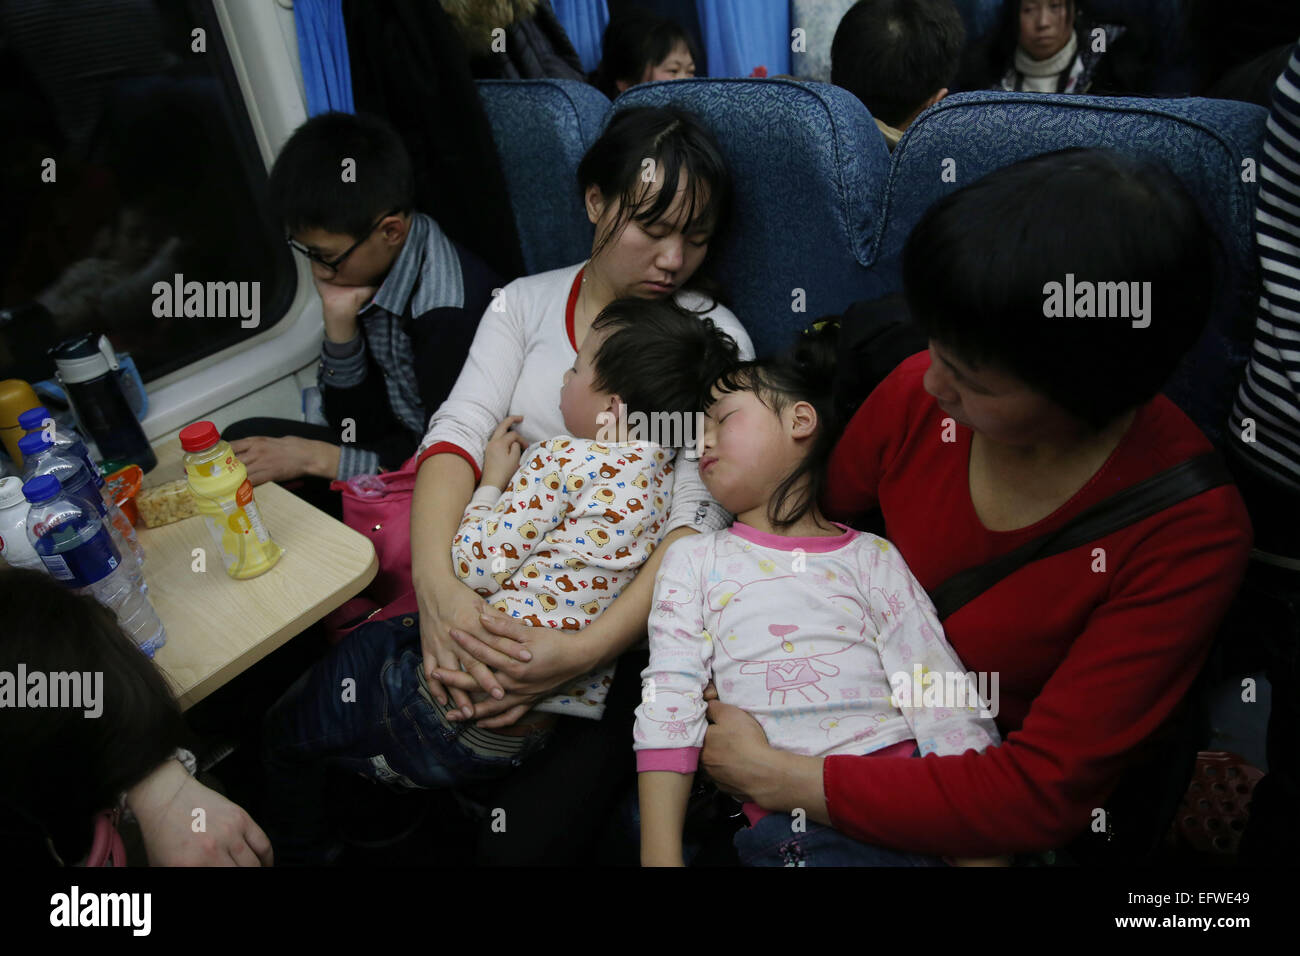 Shanghai, China's Sichuan Province. 9th Sep, 2015. Children have a sleep in parents' arms on train 3663, which runs from east China's Shanghai to Chengdu, capital of southwest China's Sichuan Province, on Sept. 9, 2015. The Spring Festival, or the Chinese lunar New Year which starts from Feb. 19 this year, is known as the world's biggest migration, with millions of people traveling vast distances for family reunions. © Ding Ting/Xinhua/Alamy Live News Stock Photo